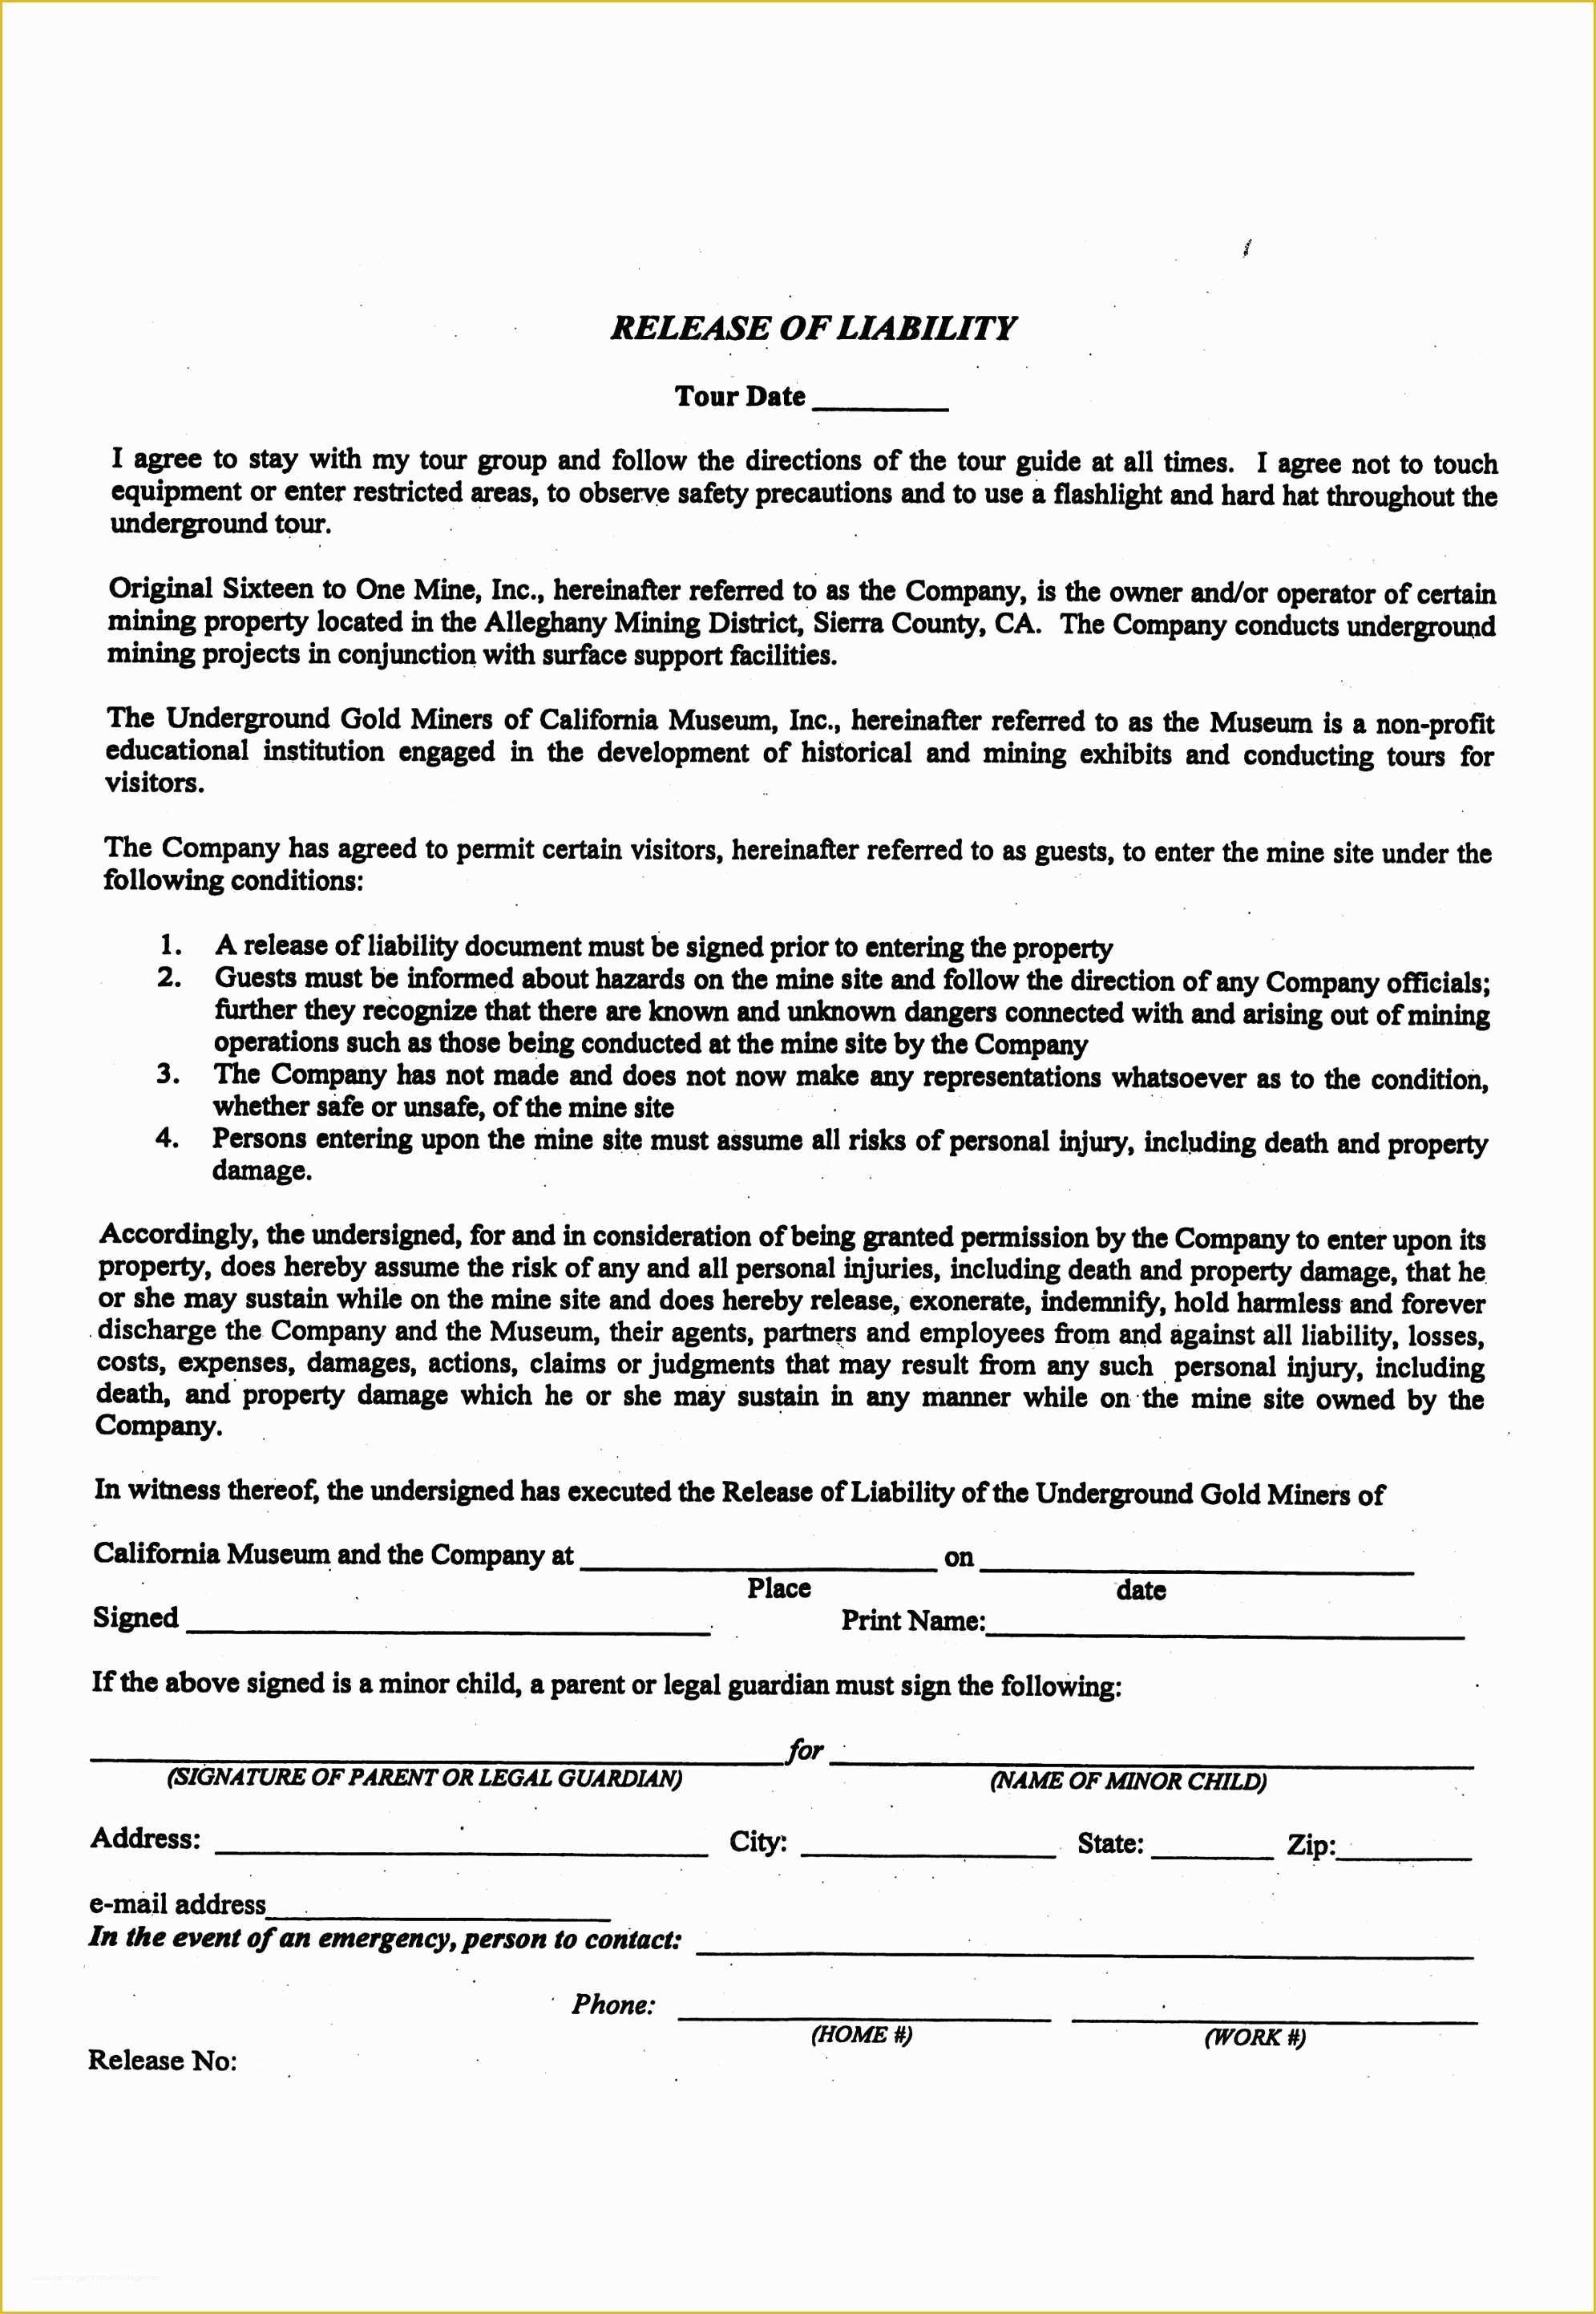 Release Of Liability Template Free Of Liability Release form Template Free Printable Documents